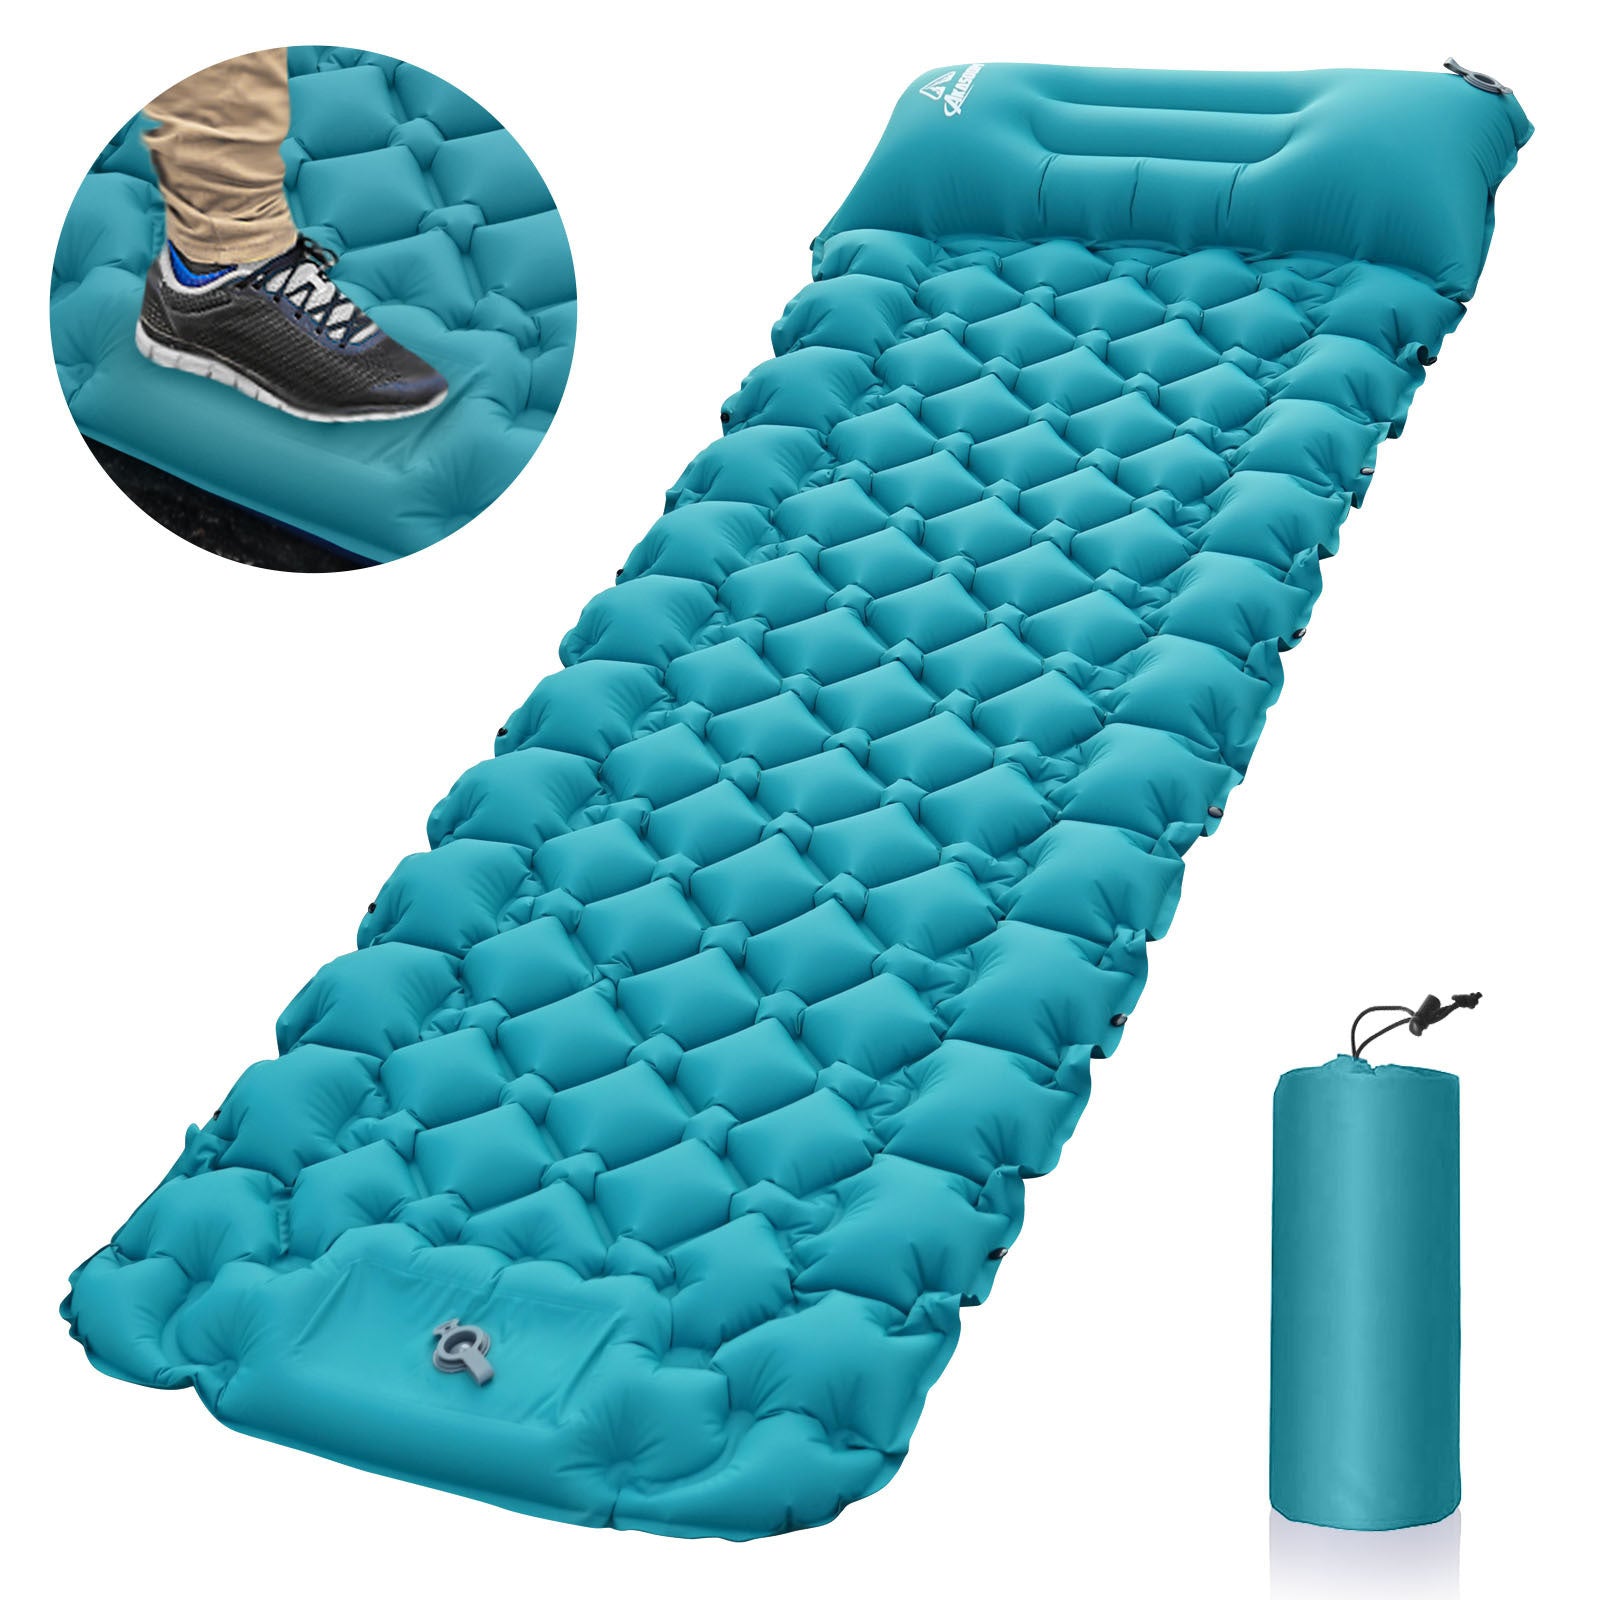 Outdoor inflatable pad - foot pedal - DragonHearth